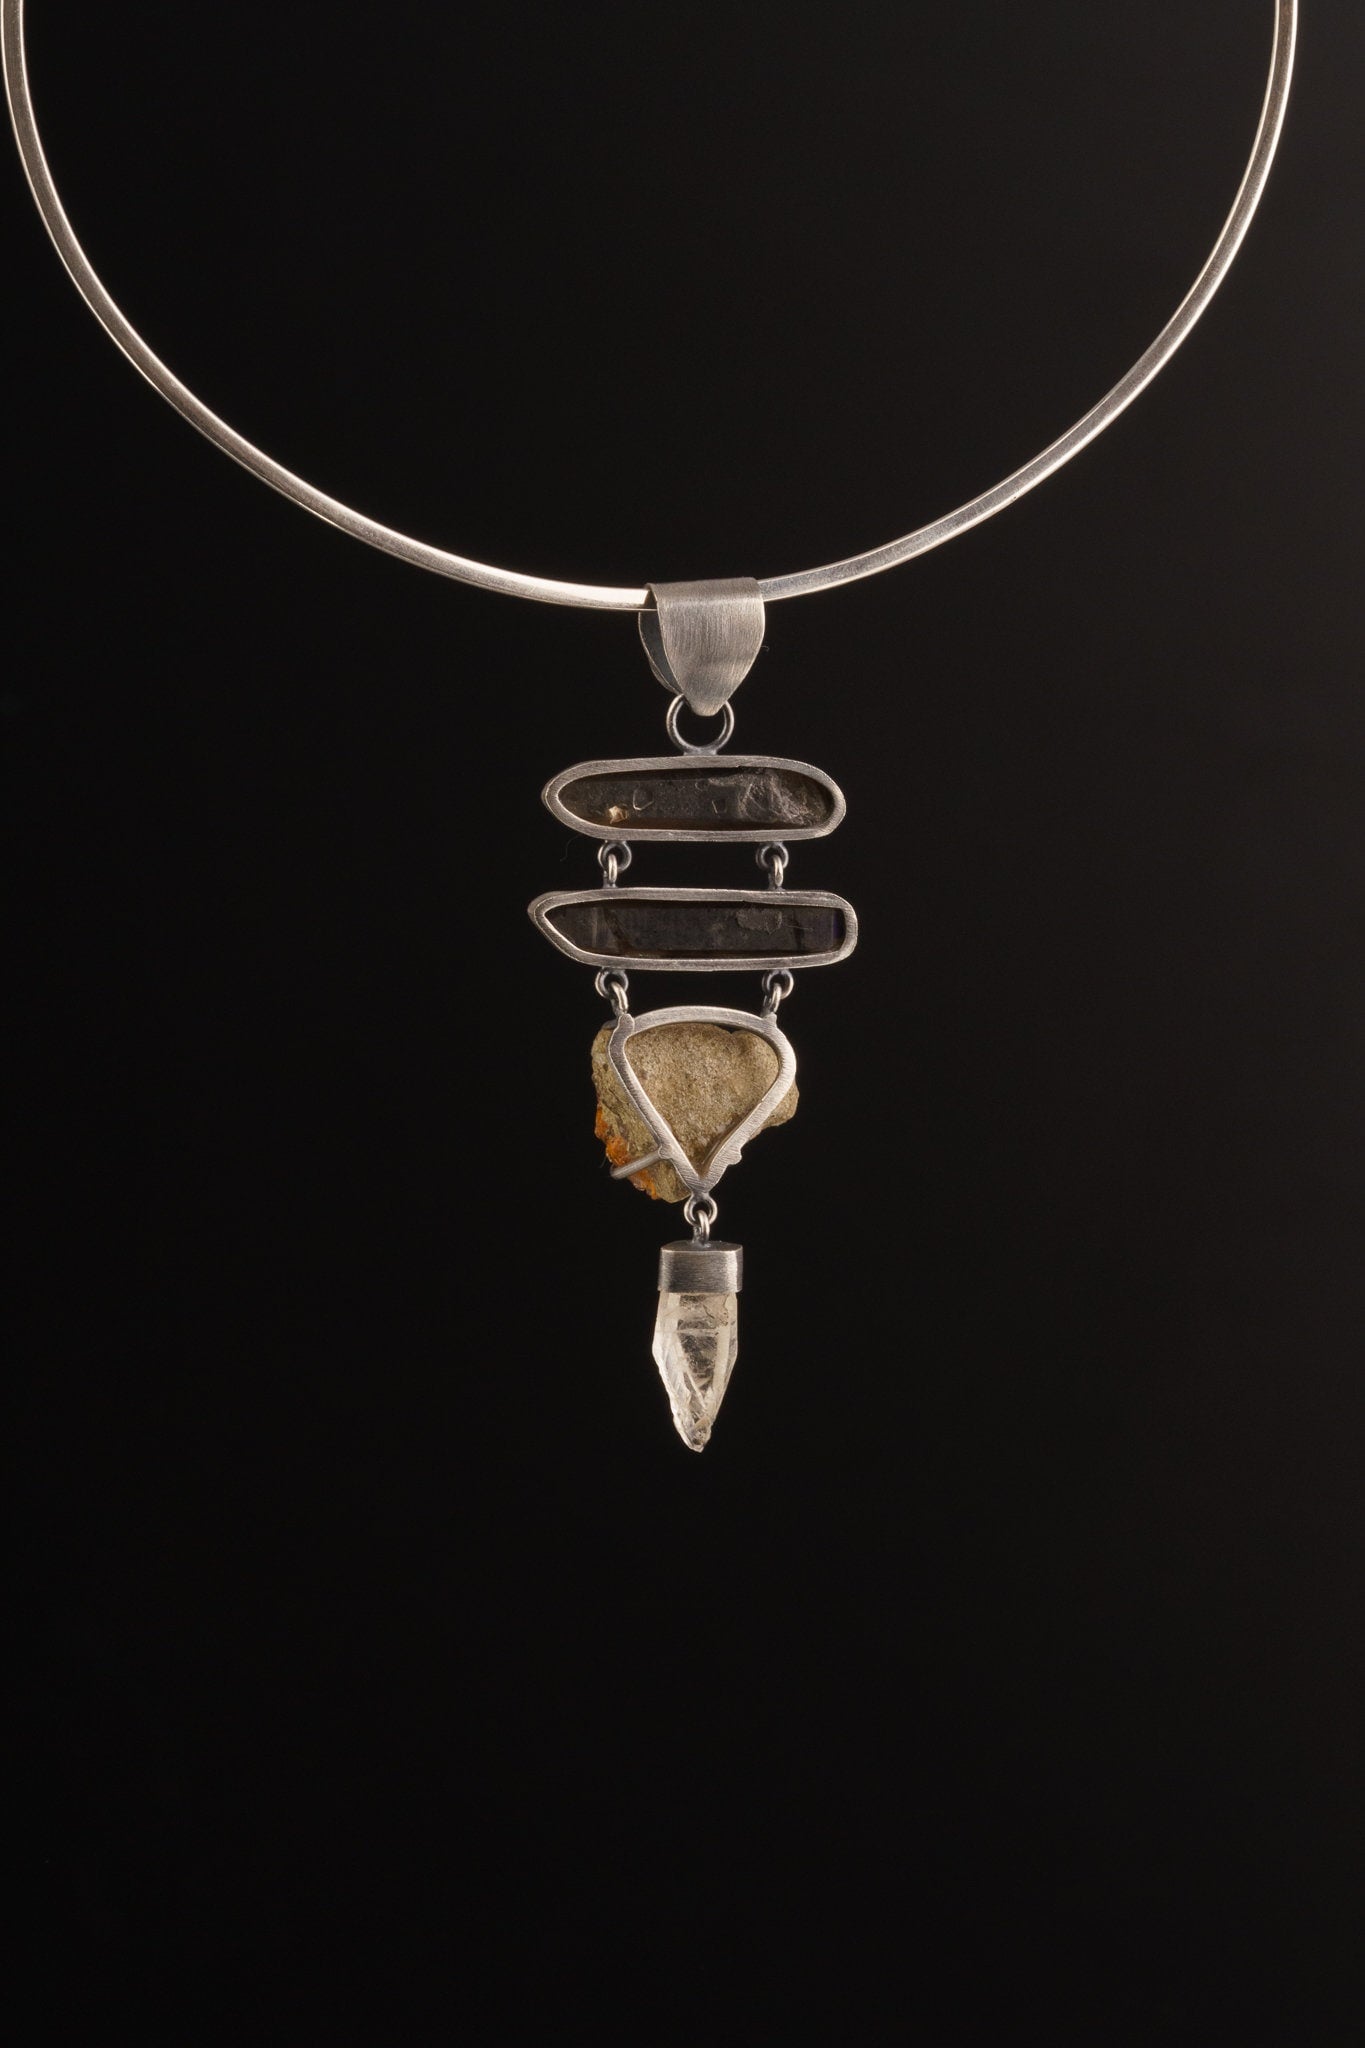 Local Opal on matrix, Smoky Quartz & ancient white quartz with a watchful Labradorite - Textured oxidized Sterling Silver - Crystal Pendant